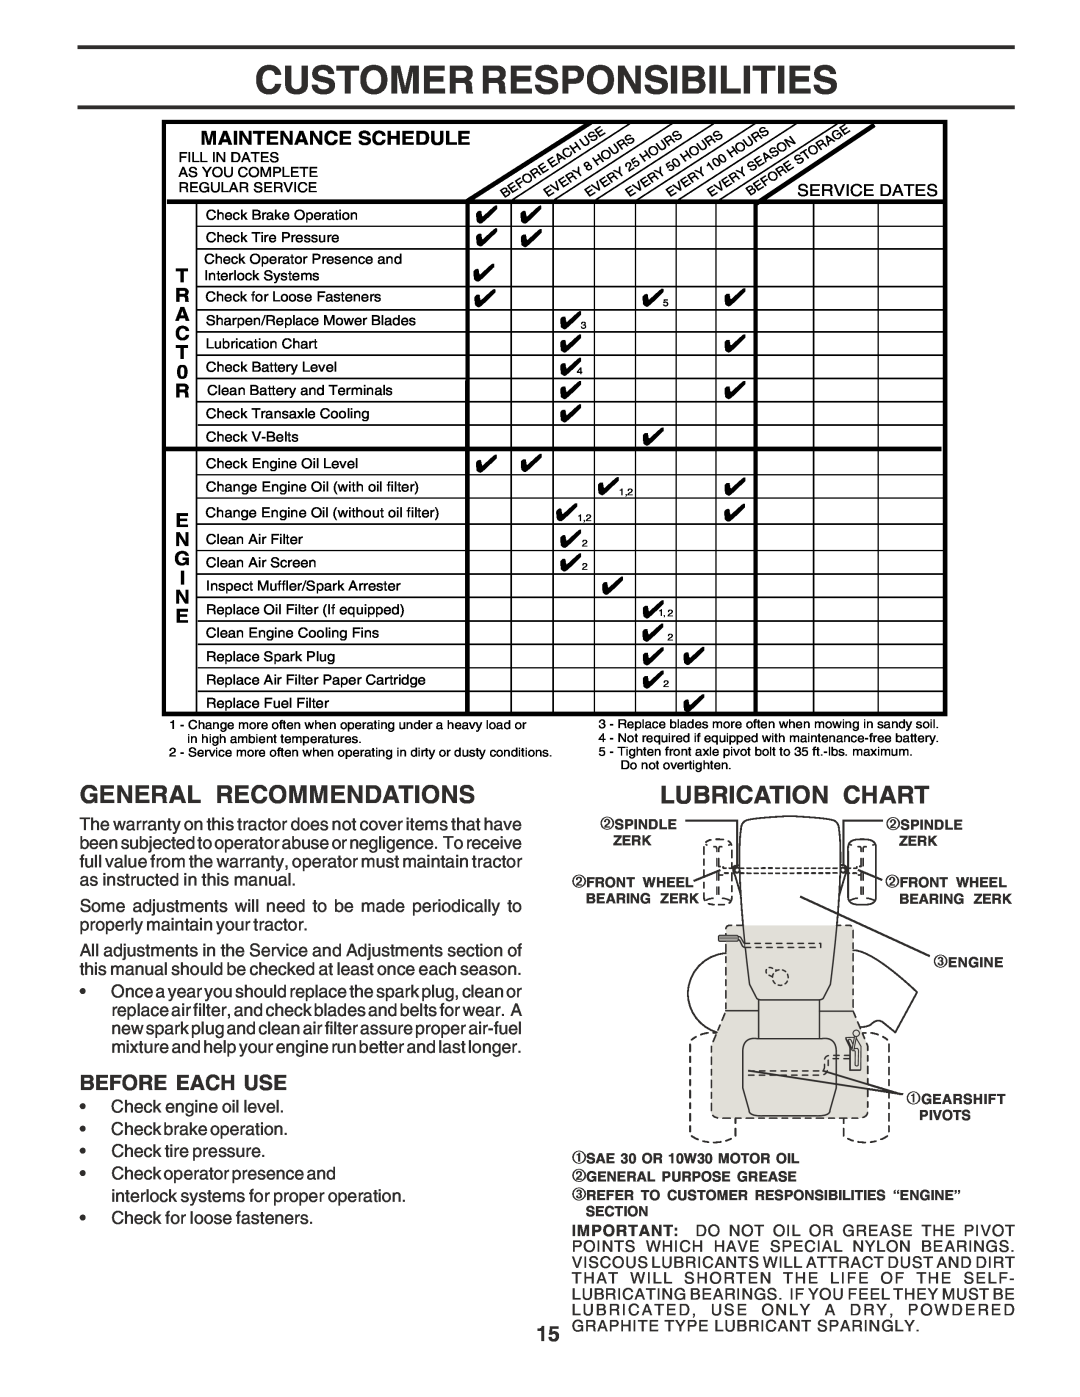 Poulan 183748 Customer Responsibilities, General Recommendations, Lubrication Chart, Before Each Use, Maintenance Schedule 